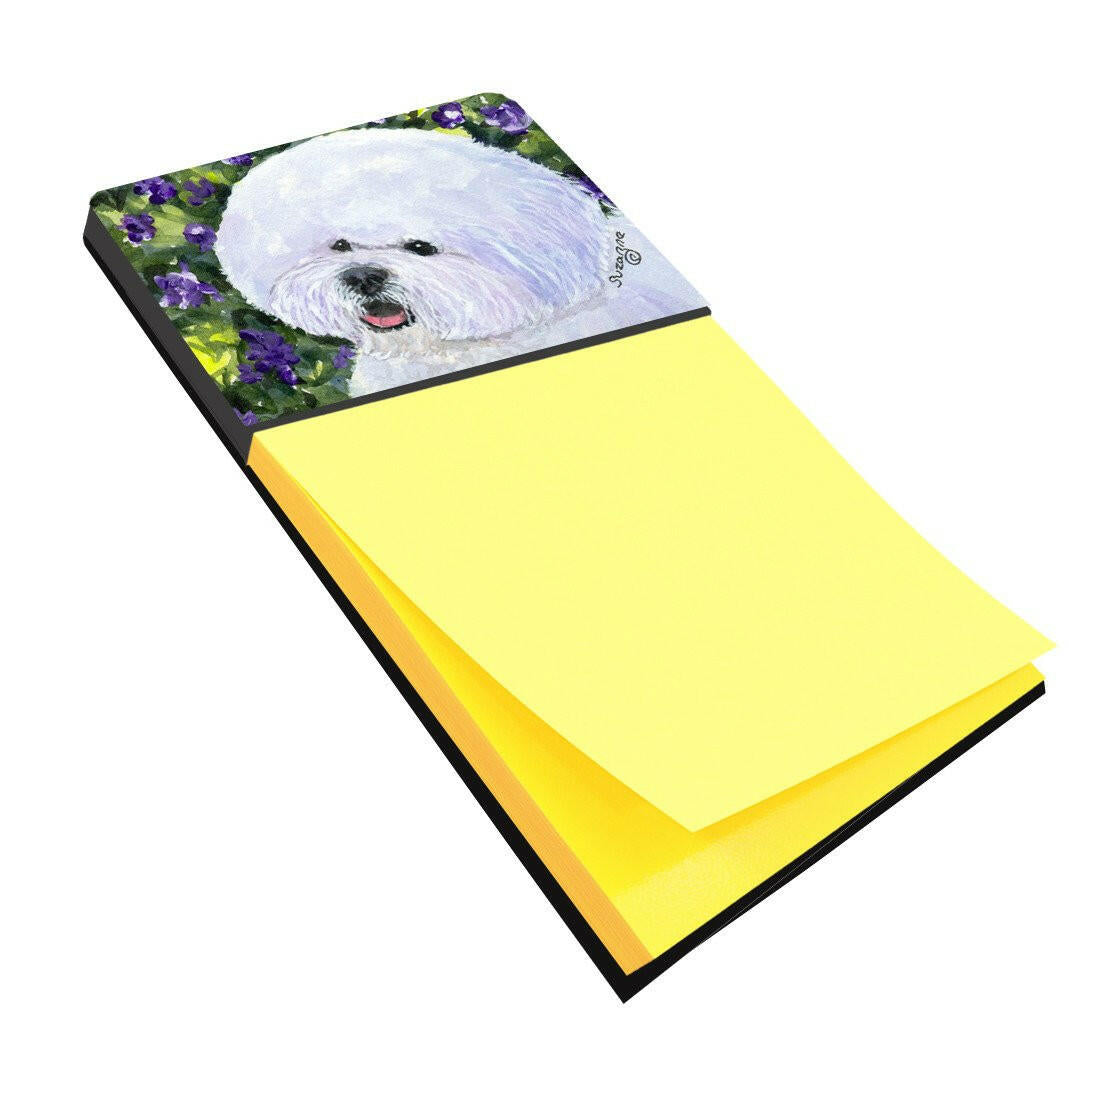 Bichon Frise Refiillable Sticky Note Holder or Postit Note Dispenser SS8897SN by Caroline's Treasures